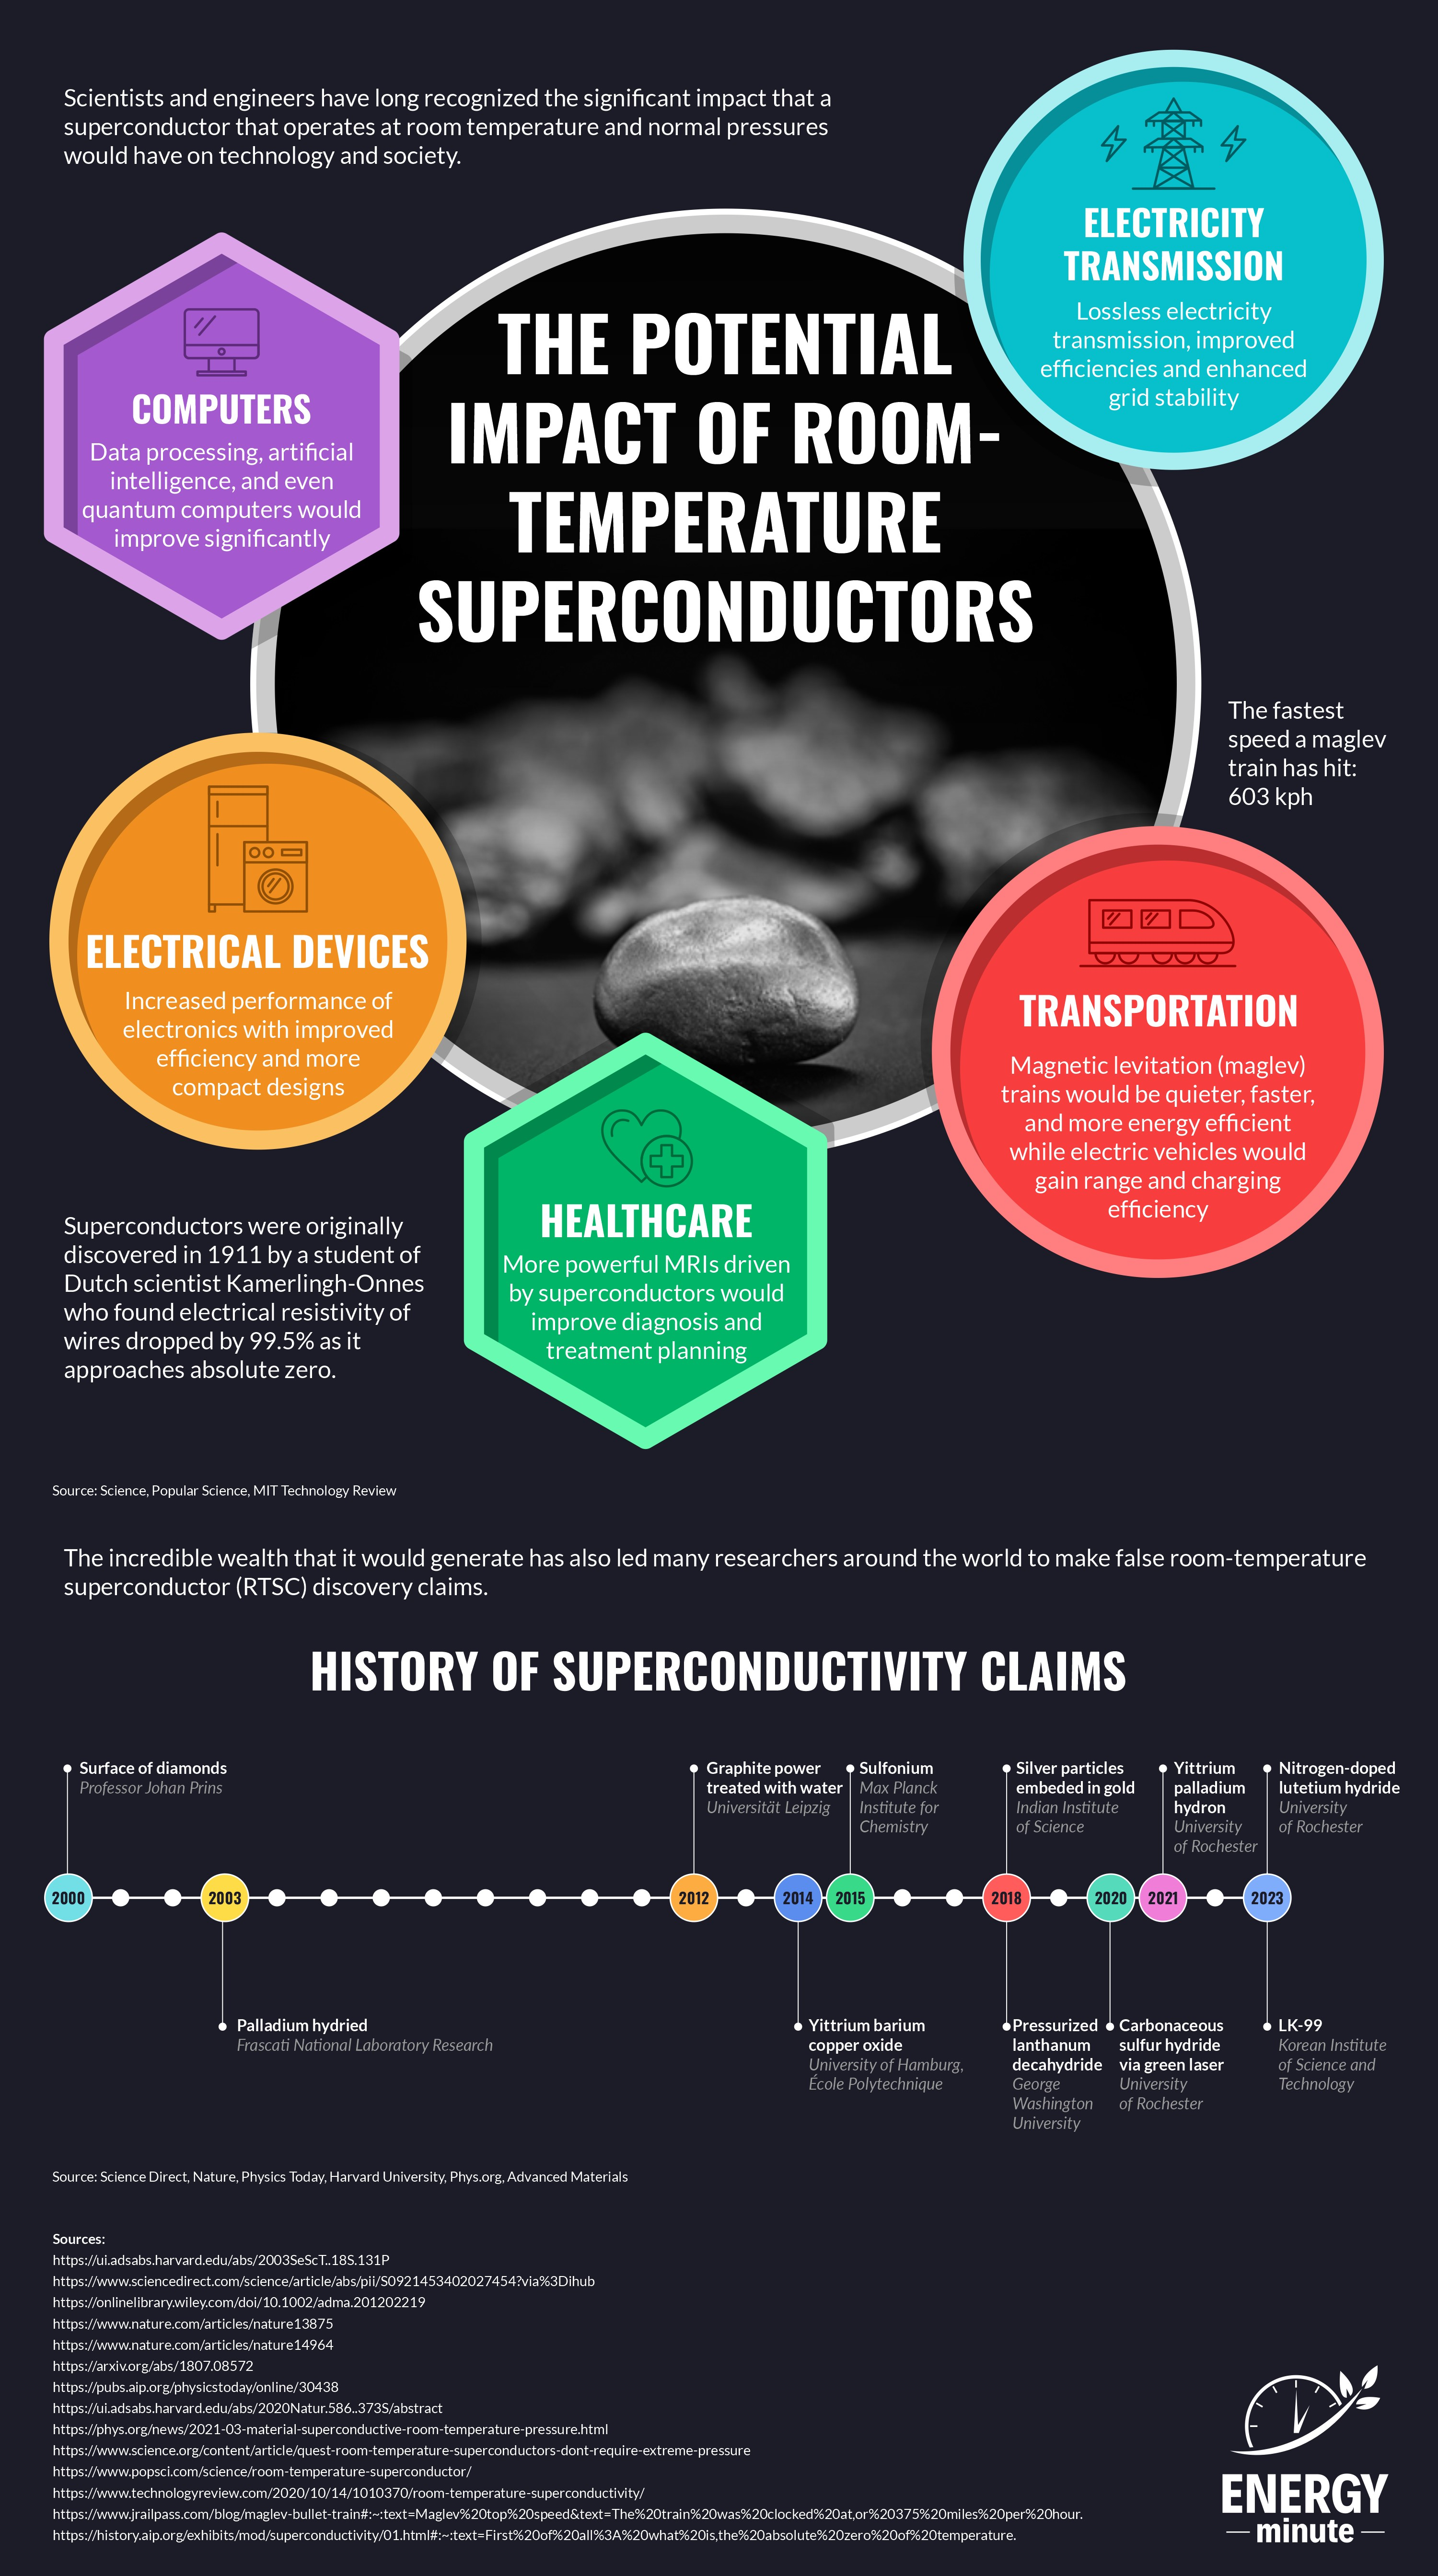 The Potential Impact of Superconductors